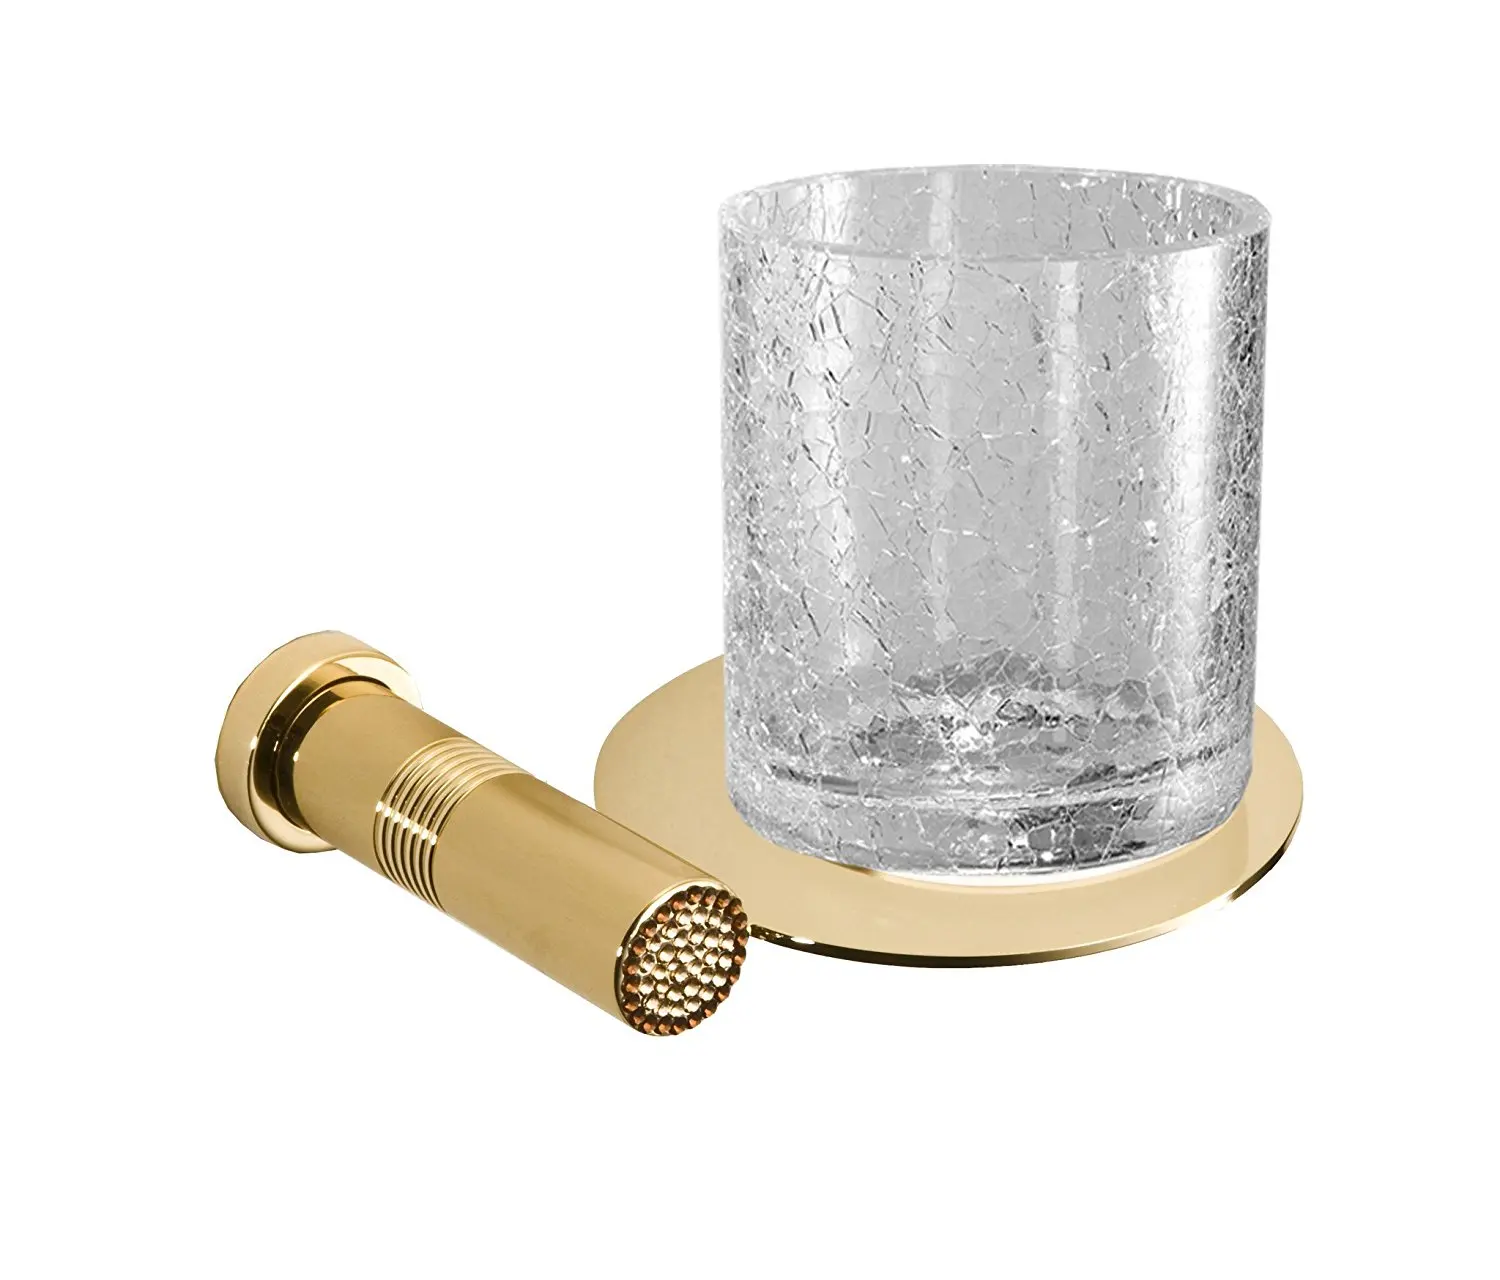 Gold Polished Brass Bathroom Dual Ceramic Cups Wall Mount Toothbrush Holder Set